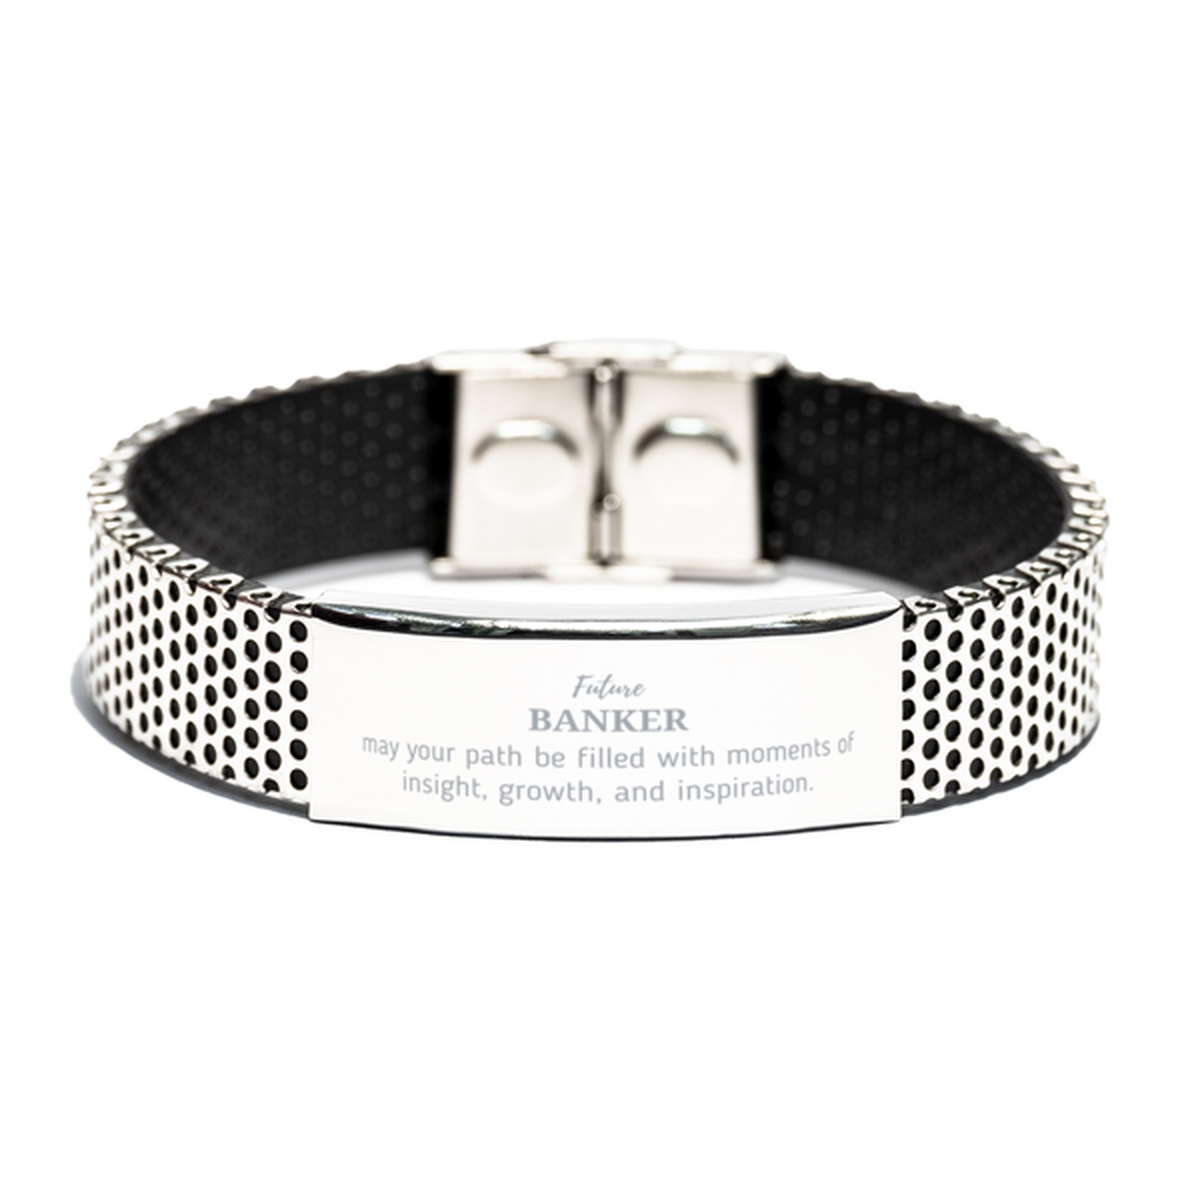 Future Banker Gifts, May your path be filled with moments of insight, Graduation Gifts for New Banker, Christmas Unique Stainless Steel Bracelet For Men, Women, Friends